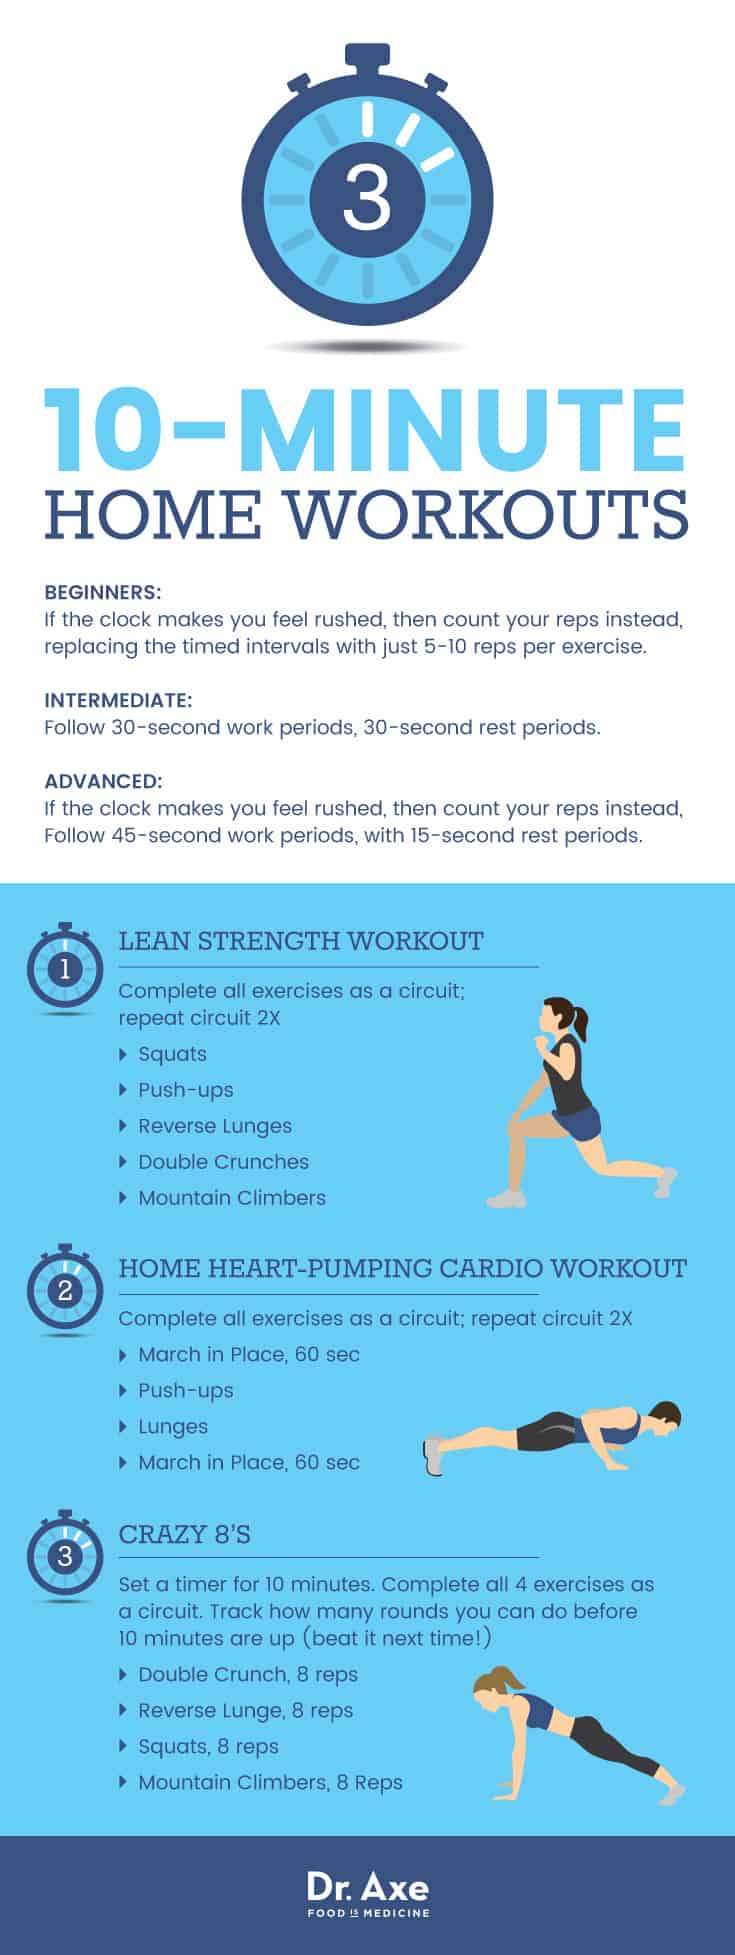 At-home 10-minute workouts guide - Dr. Axe